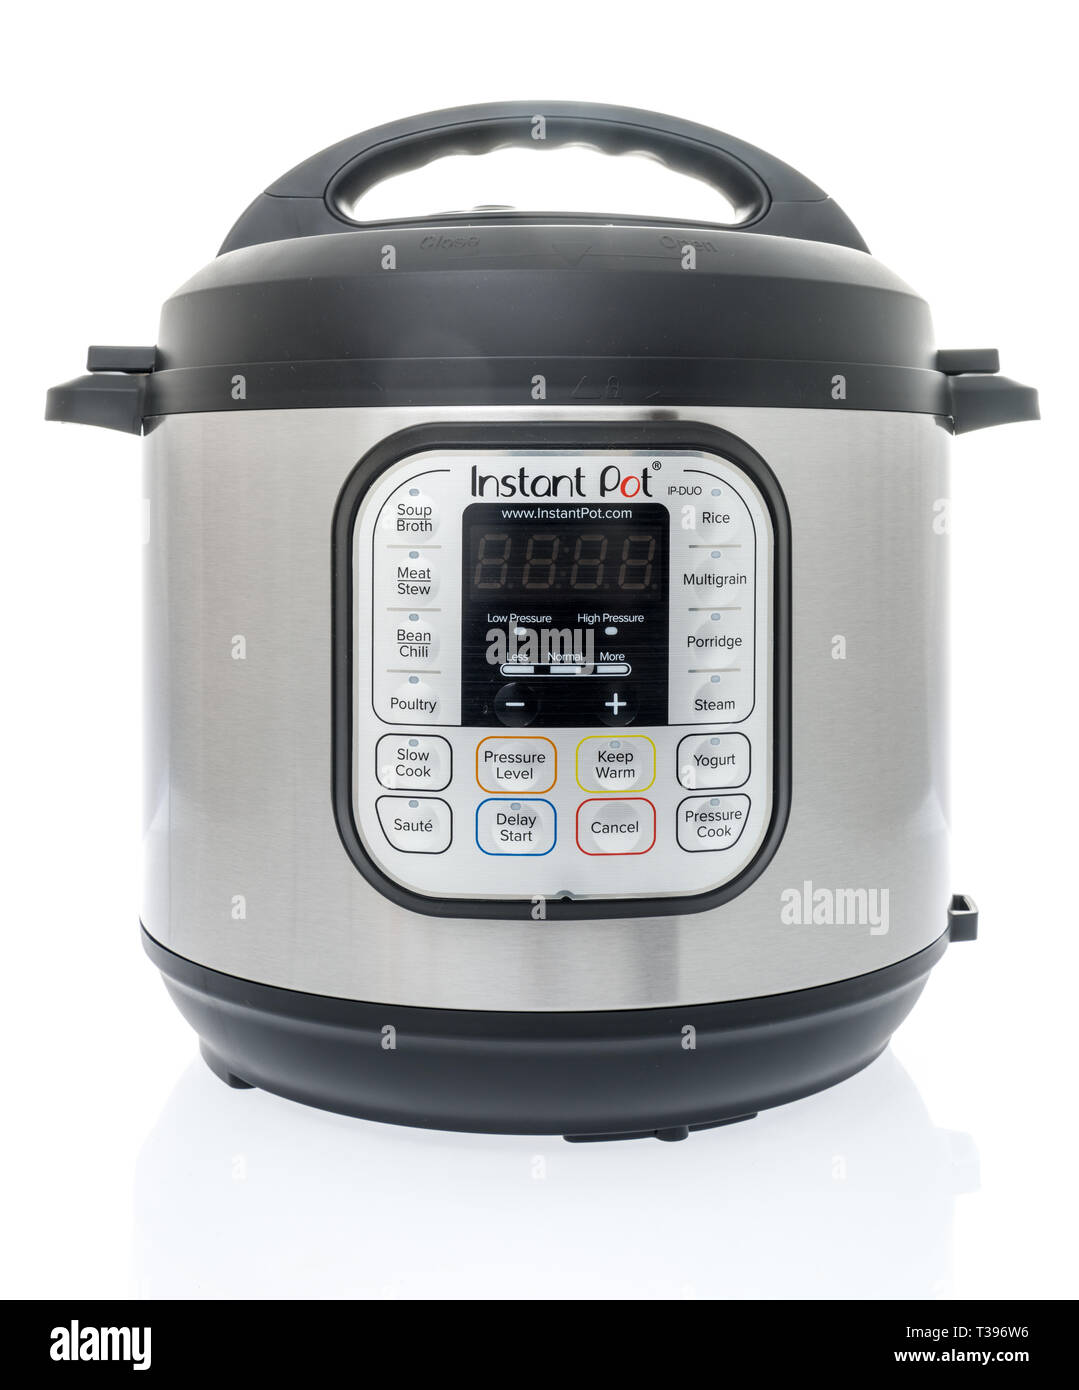 https://c8.alamy.com/comp/T396W6/winneconne-wi-7-april-2019-an-instant-pot-cooking-appliance-on-an-isolated-background-T396W6.jpg